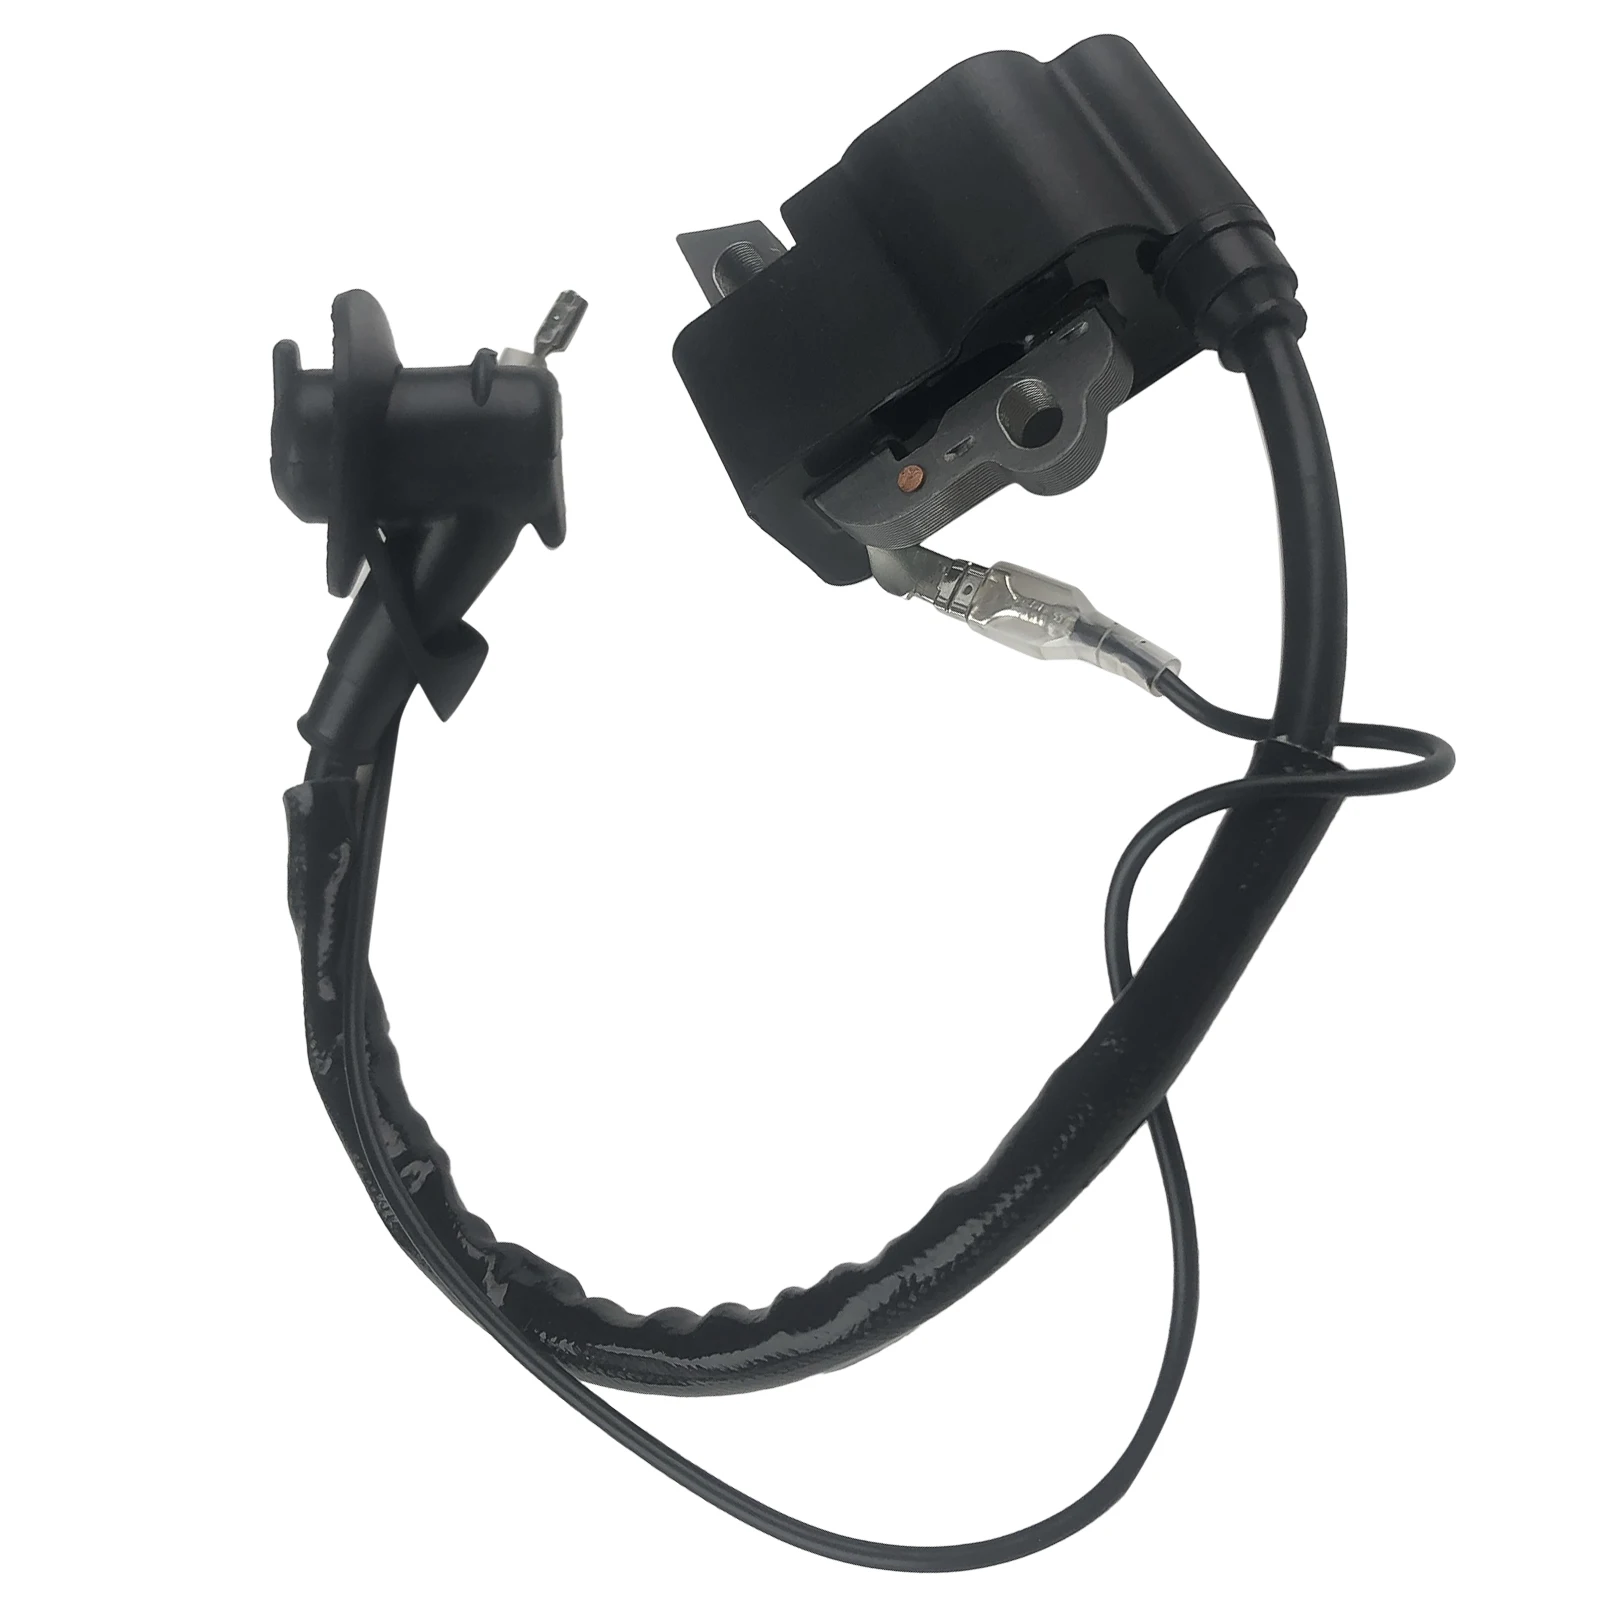 

Ignition Coil Module Replace 1140 1305 B, 1140 400 1303 fits for Stihl MS311 MS391 Chainsaw Garden Lawn Power Tool Repair Part